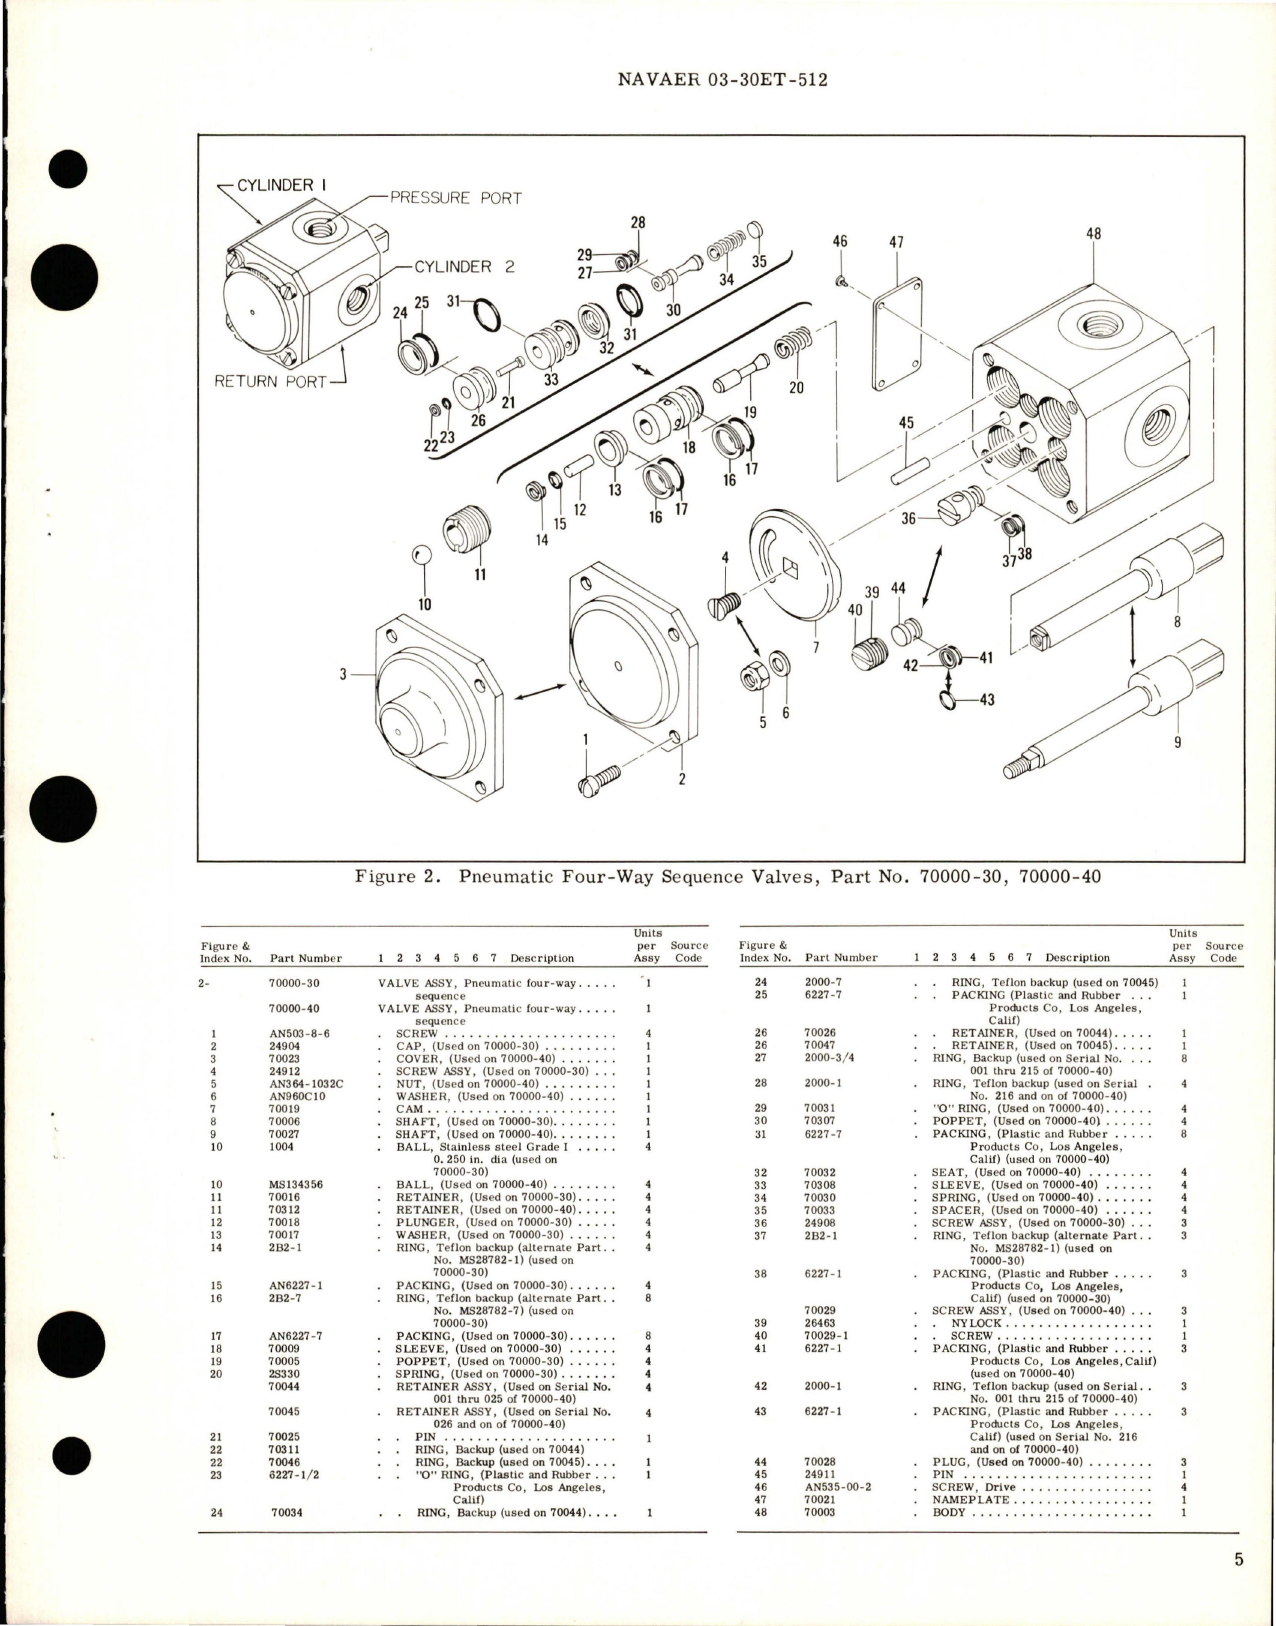 Sample page 5 from AirCorps Library document: Overhaul Instructions with Parts Breakdown for Pneumatic Four-Way Sequence Valves - Parts 70000-30 and 70000-40